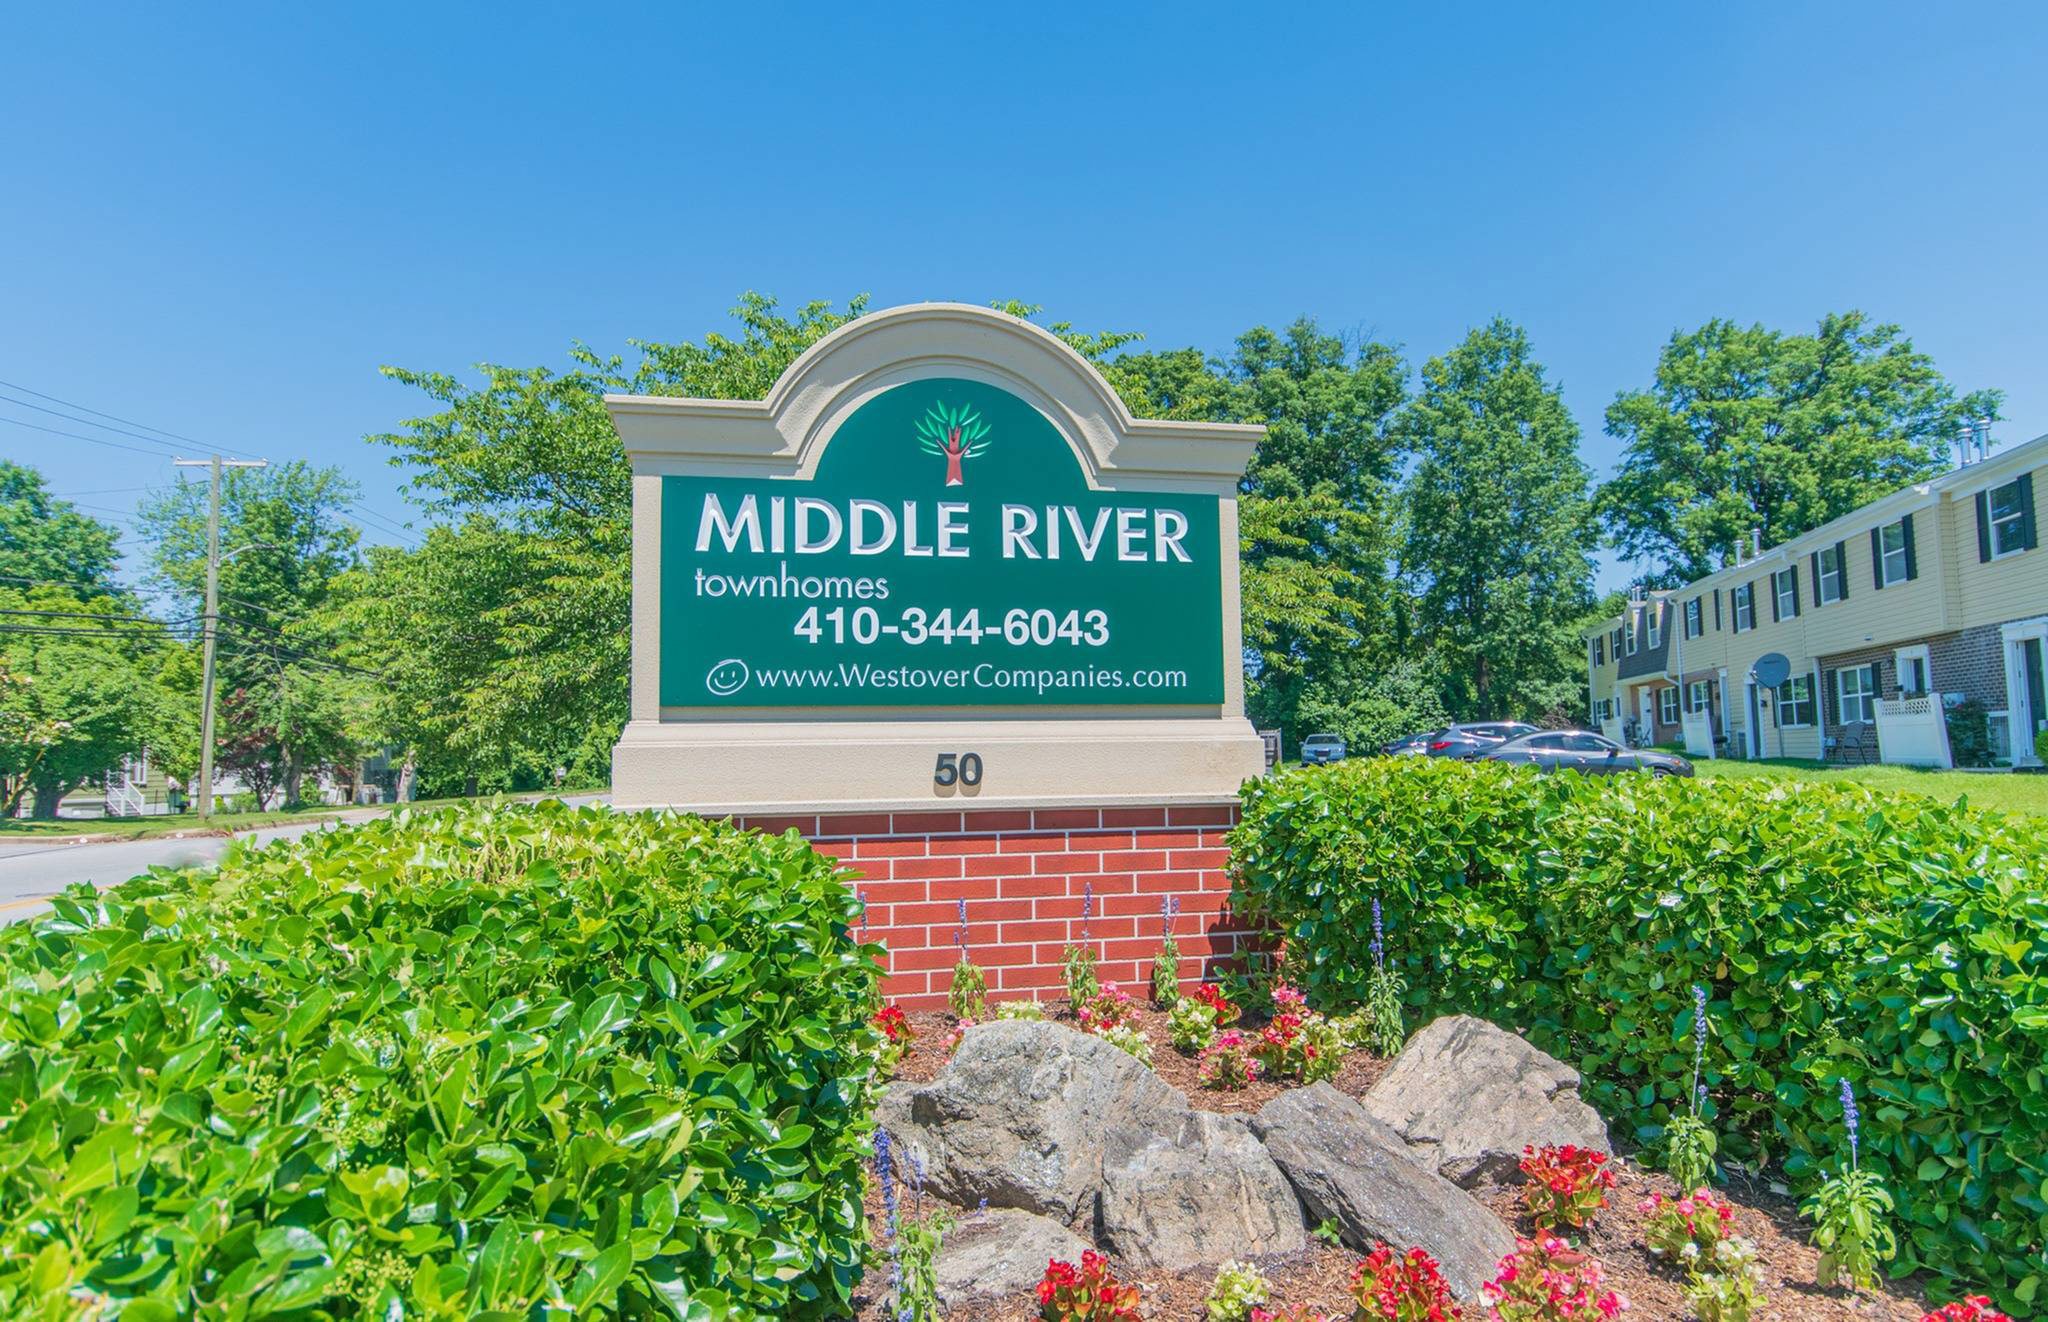 Middle River Townhomes welcome sign.